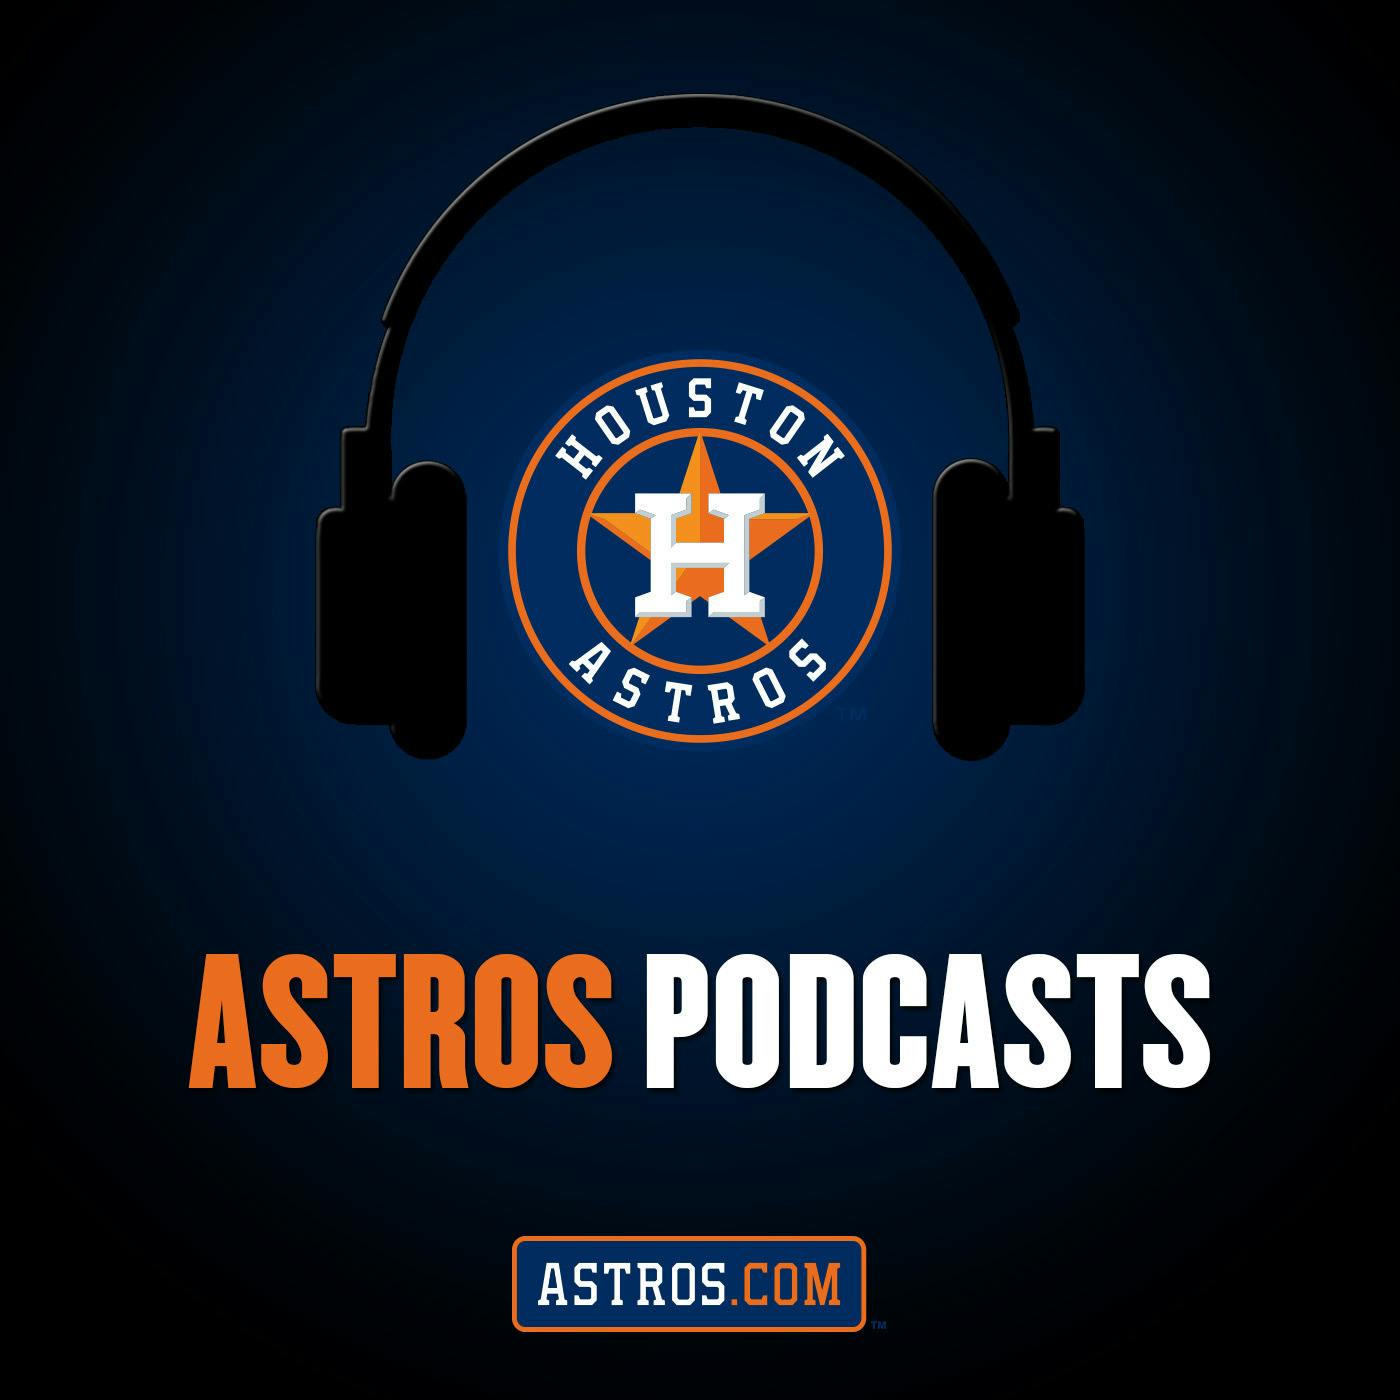 12/03 Astroline Hot Stove Podcast by Karbach Brewing: General Manager James Click, Robert Ford, and Steve Sparks